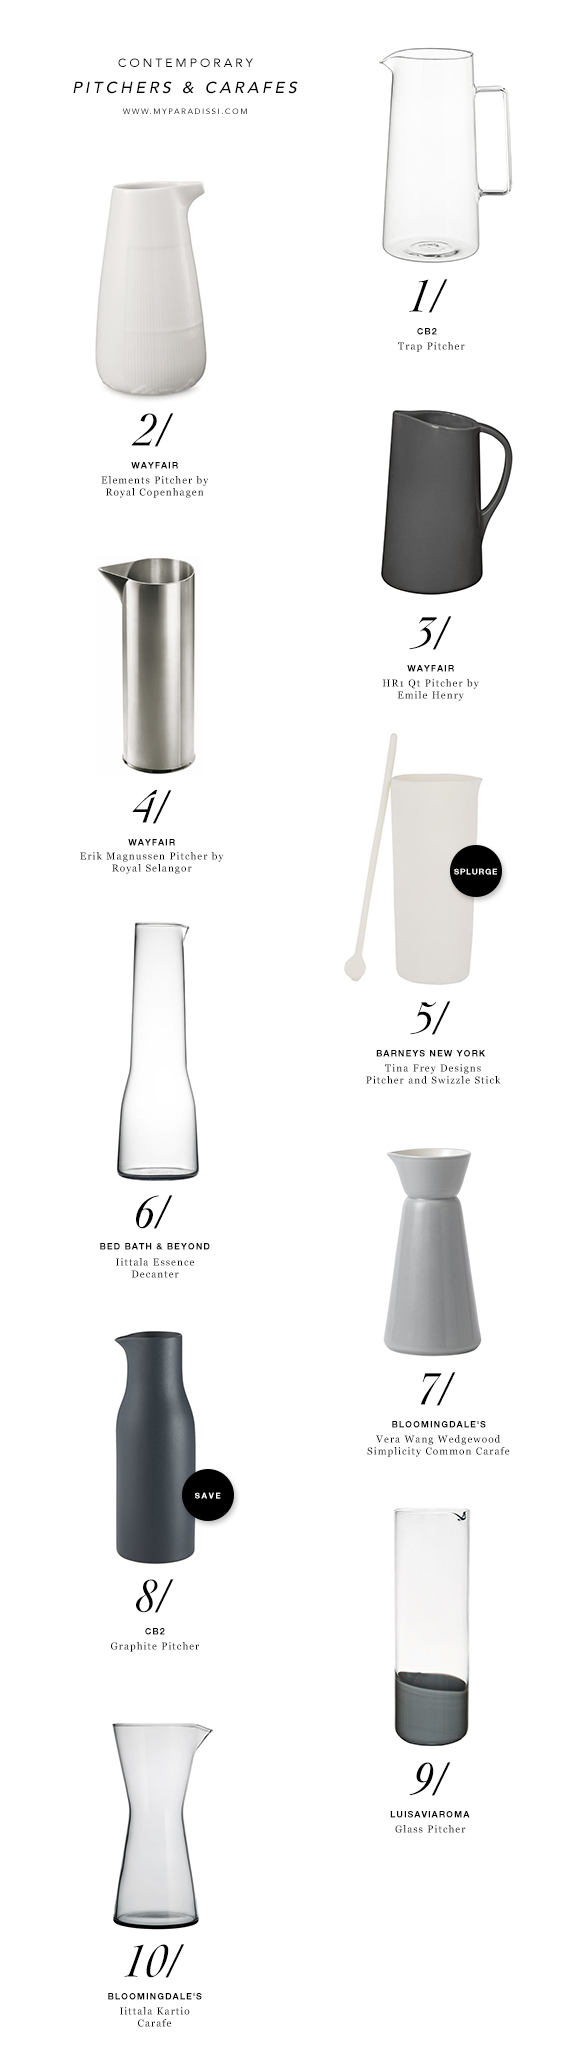 10 BEST: Contemporary pitchers and carafes | My Paradissi